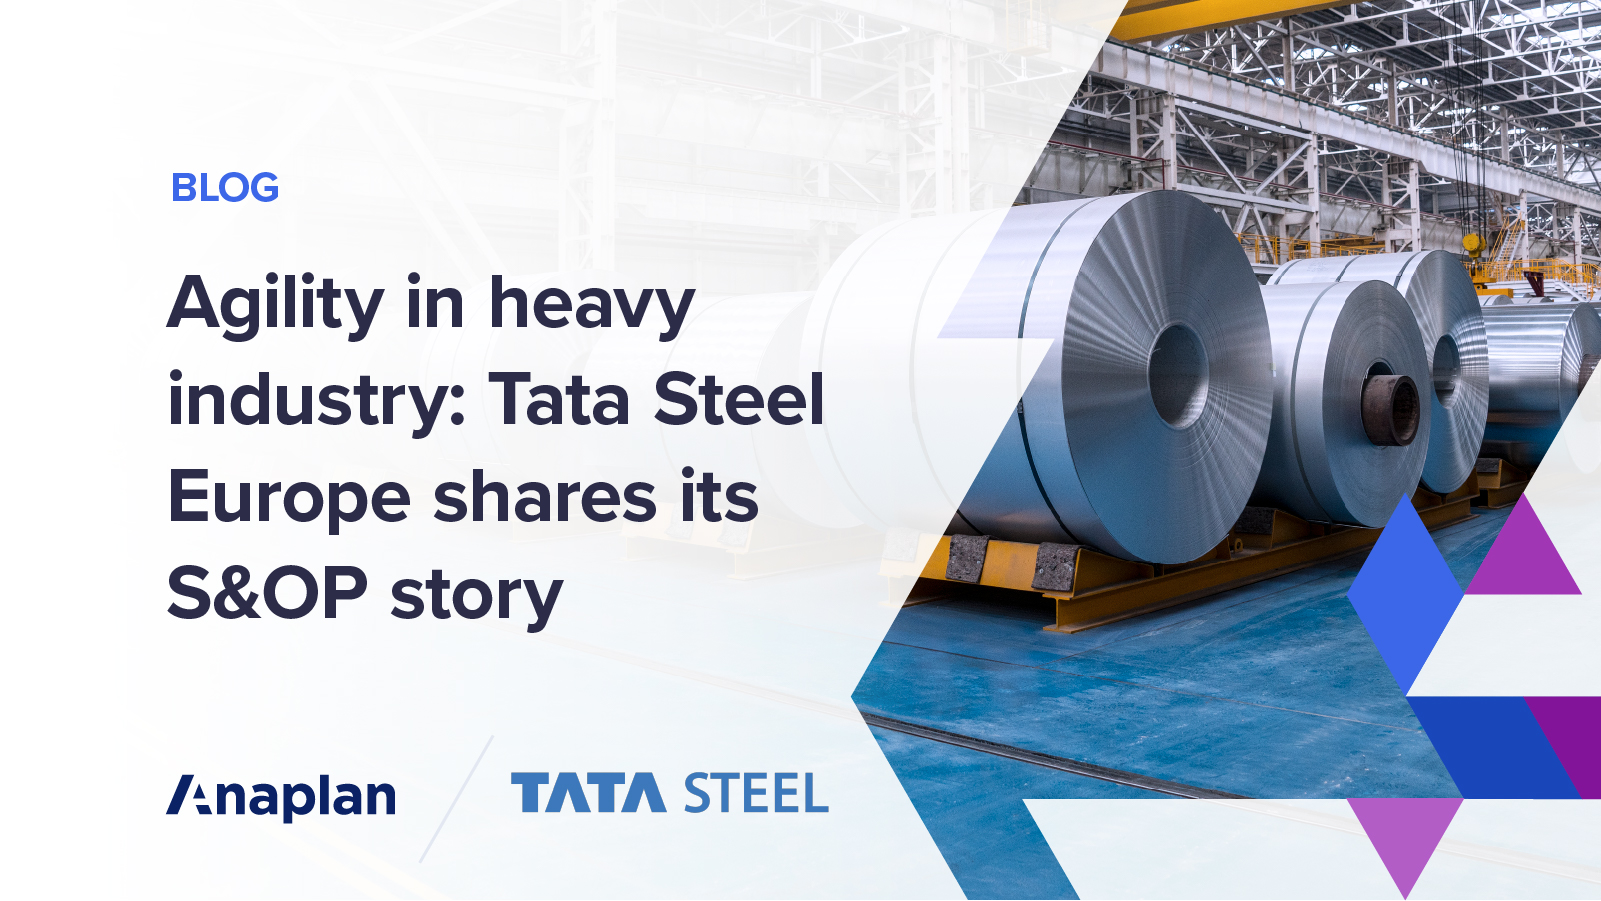 Tata Steel aims at multi-year transformation to become a leader in digital  steel-making - The Economic Times